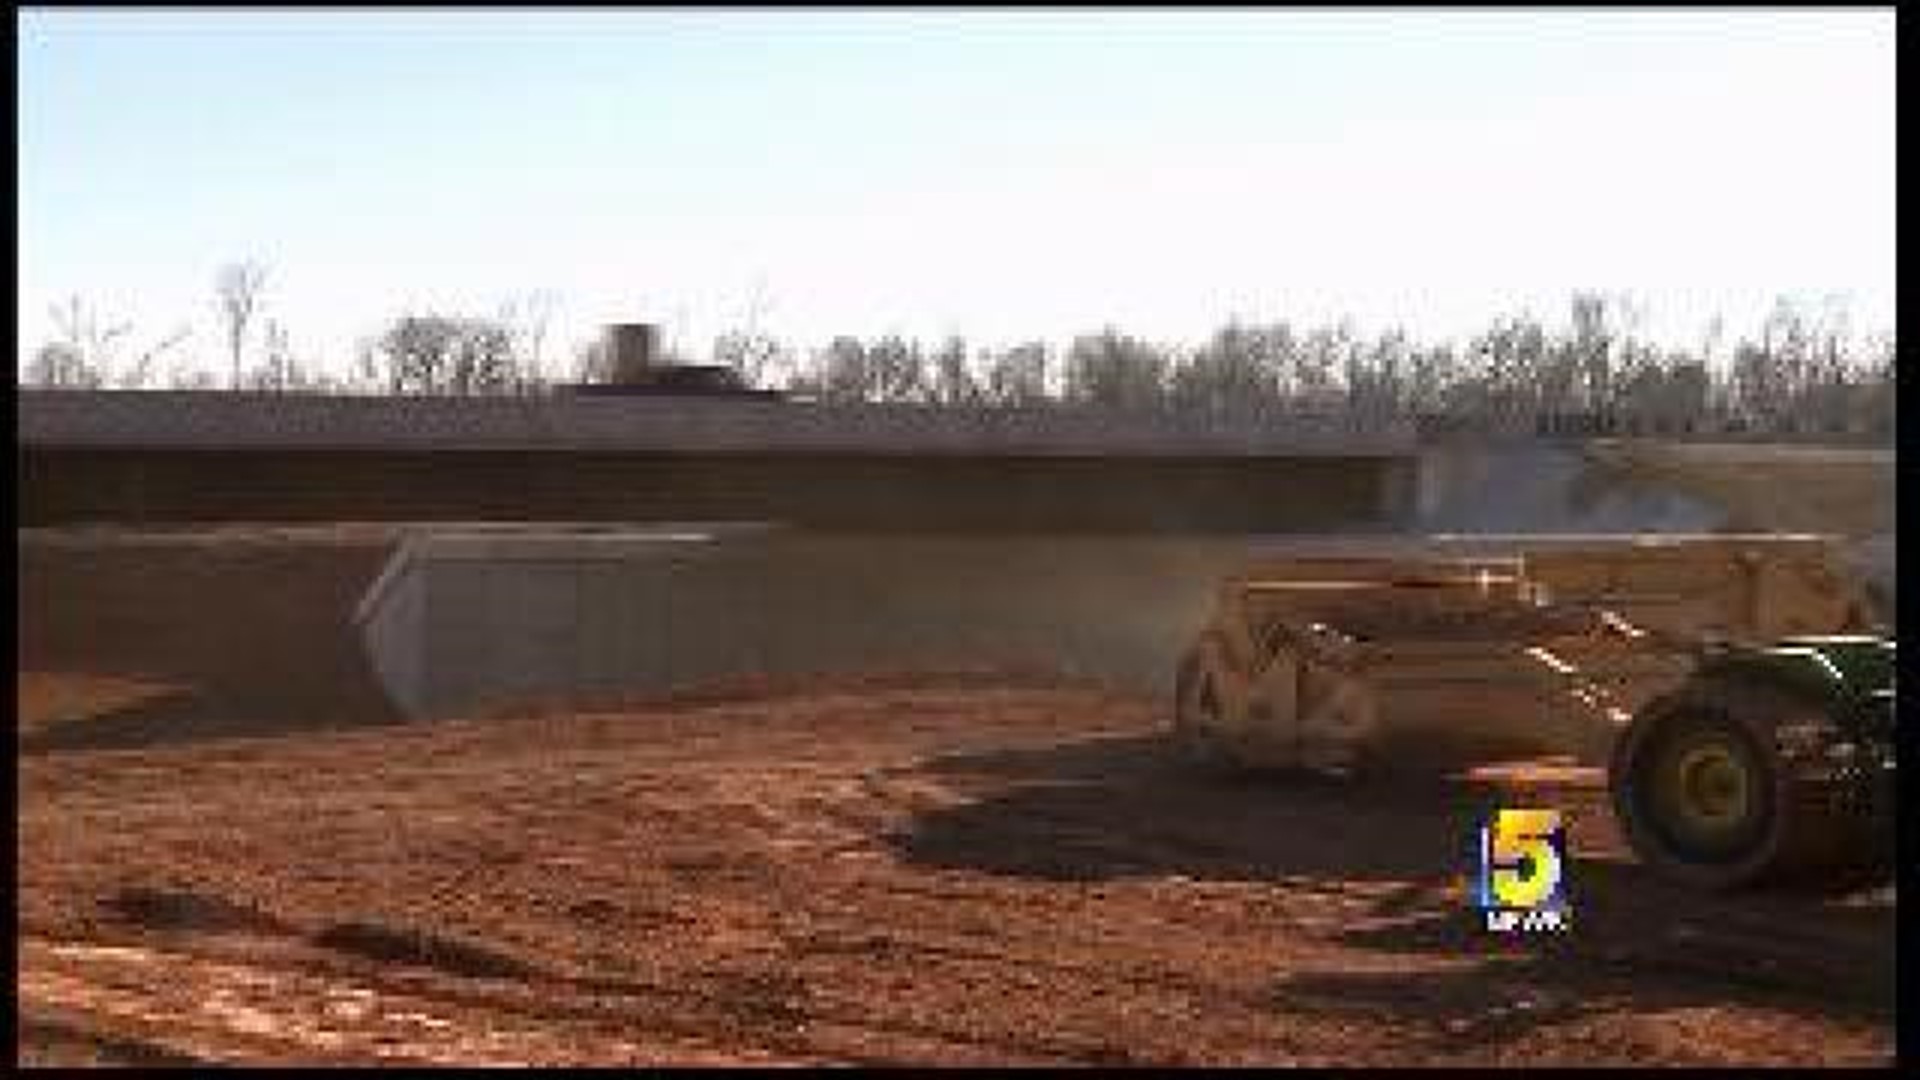 Interstate 540 Gets New Name